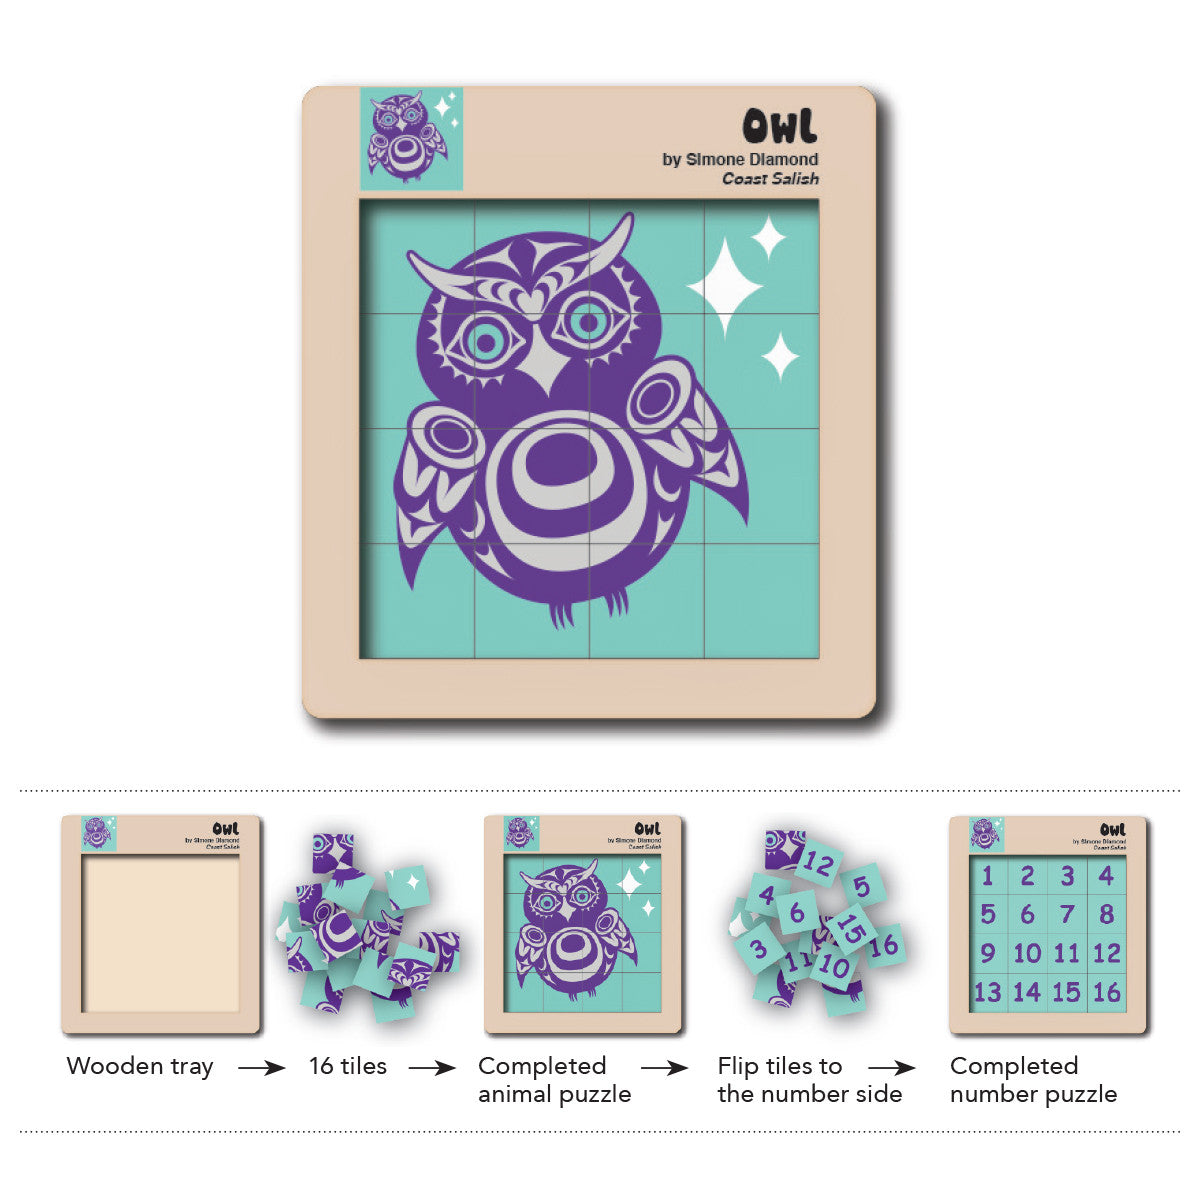 Double-Sided Wooden Tile Puzzle - Owl by Simone Diamond